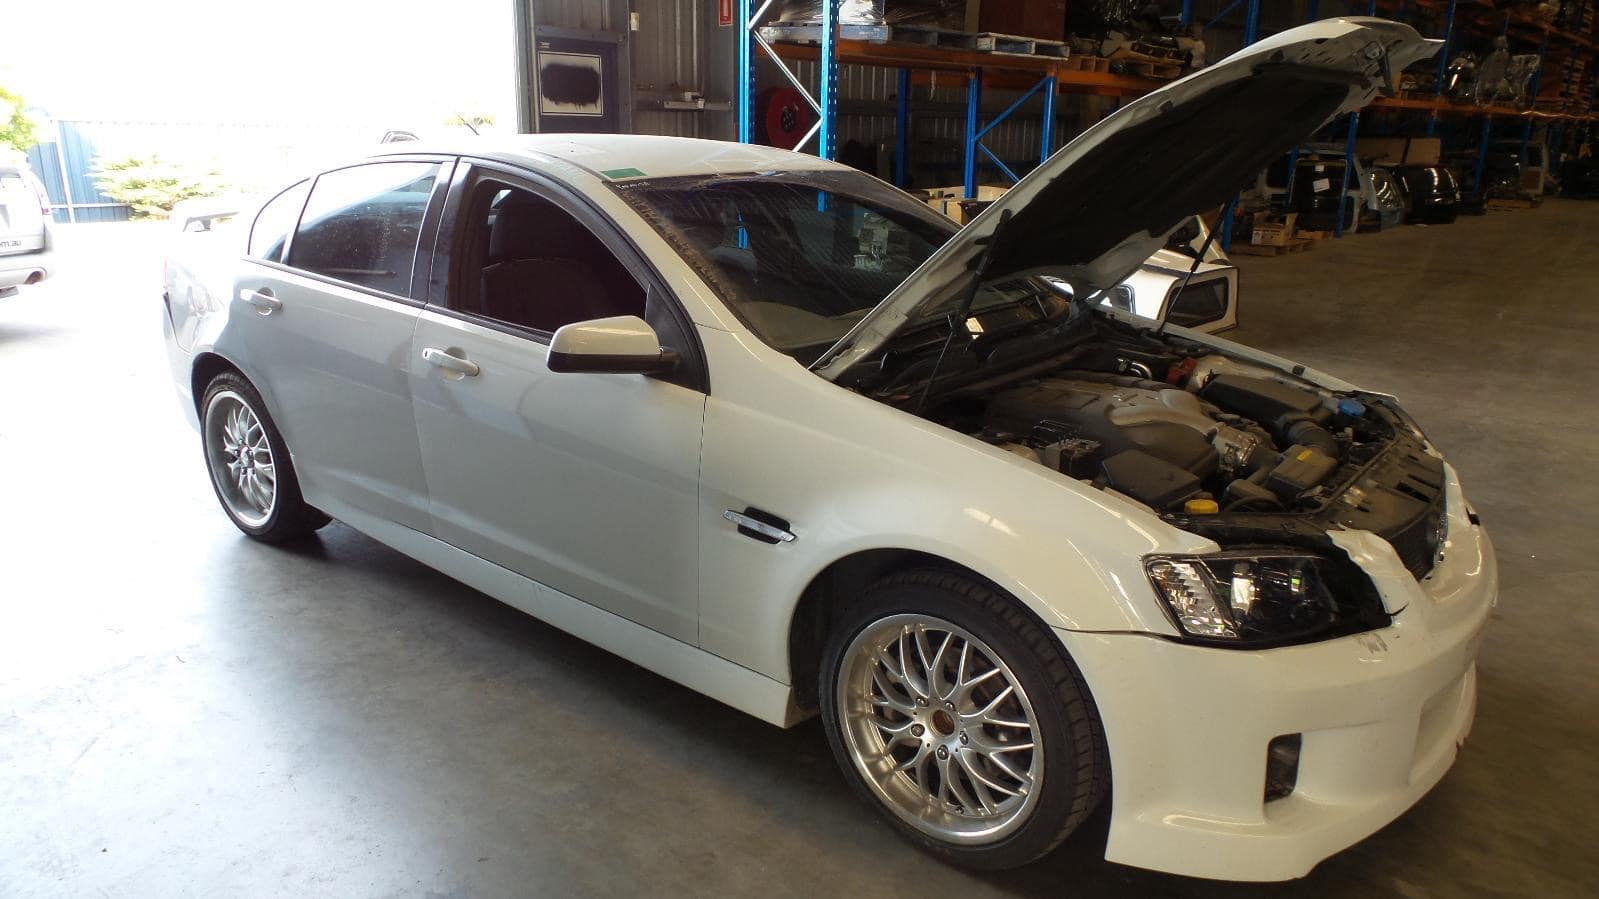 highest quality second hand auto parts Adelaide